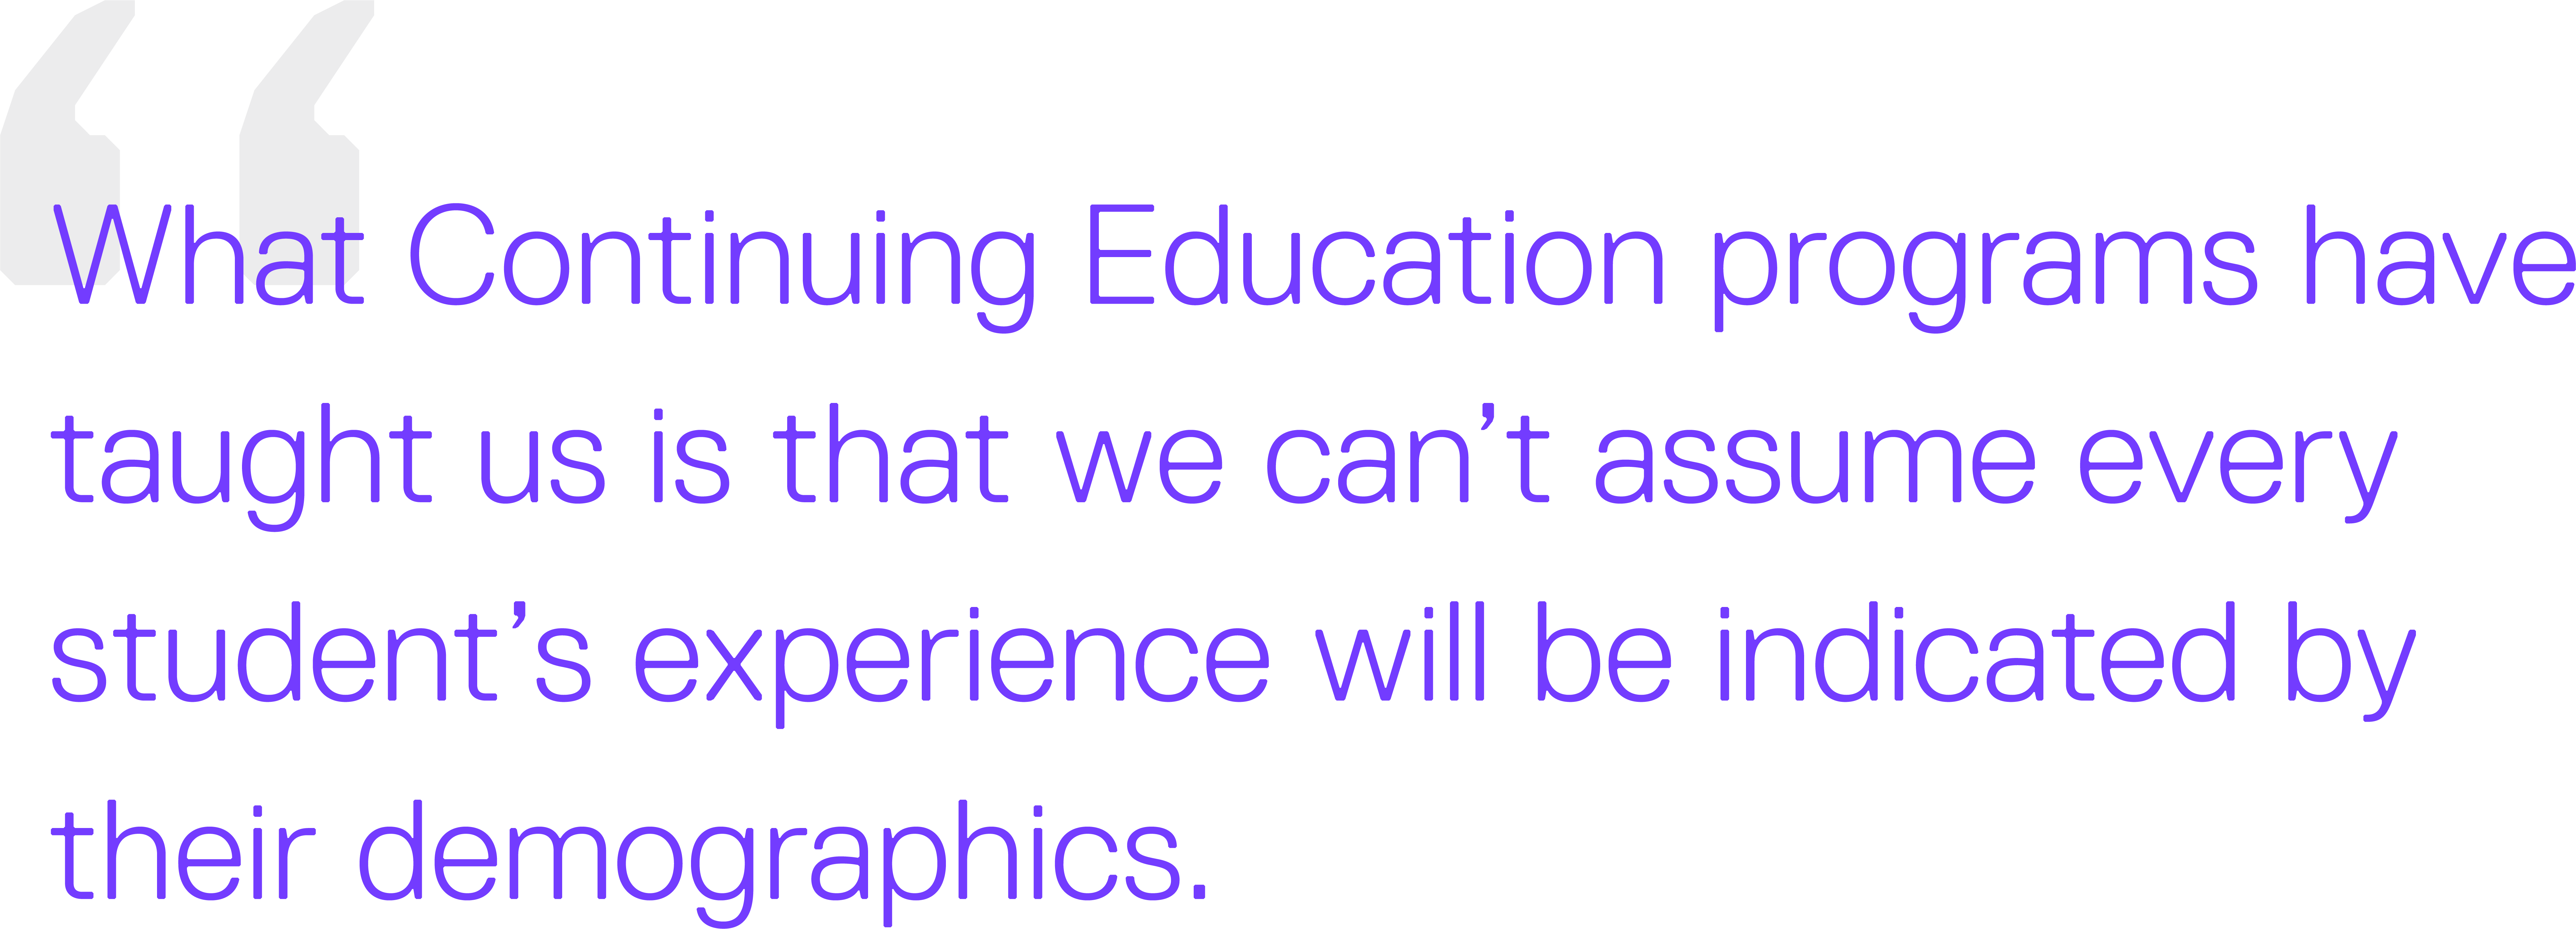 What Continuing Education programs have taught us is that we can’t assume every student’s experience will be indicated by their demographics.